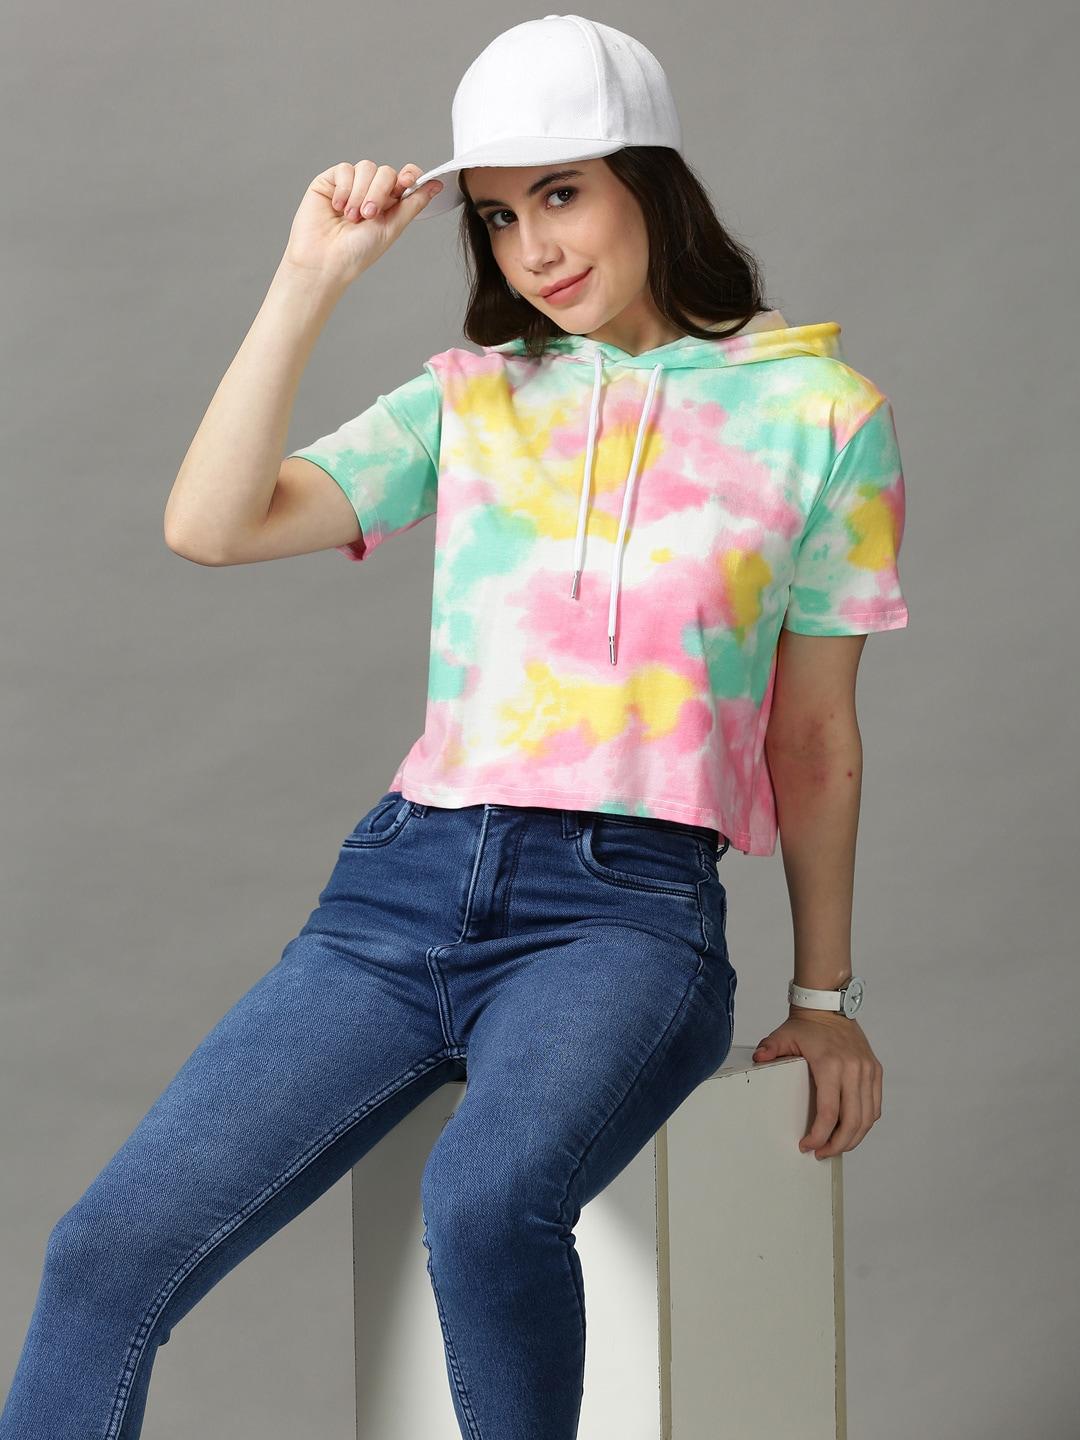 SHOWOFF Pink & Yellow Tie and Dye Crop Top